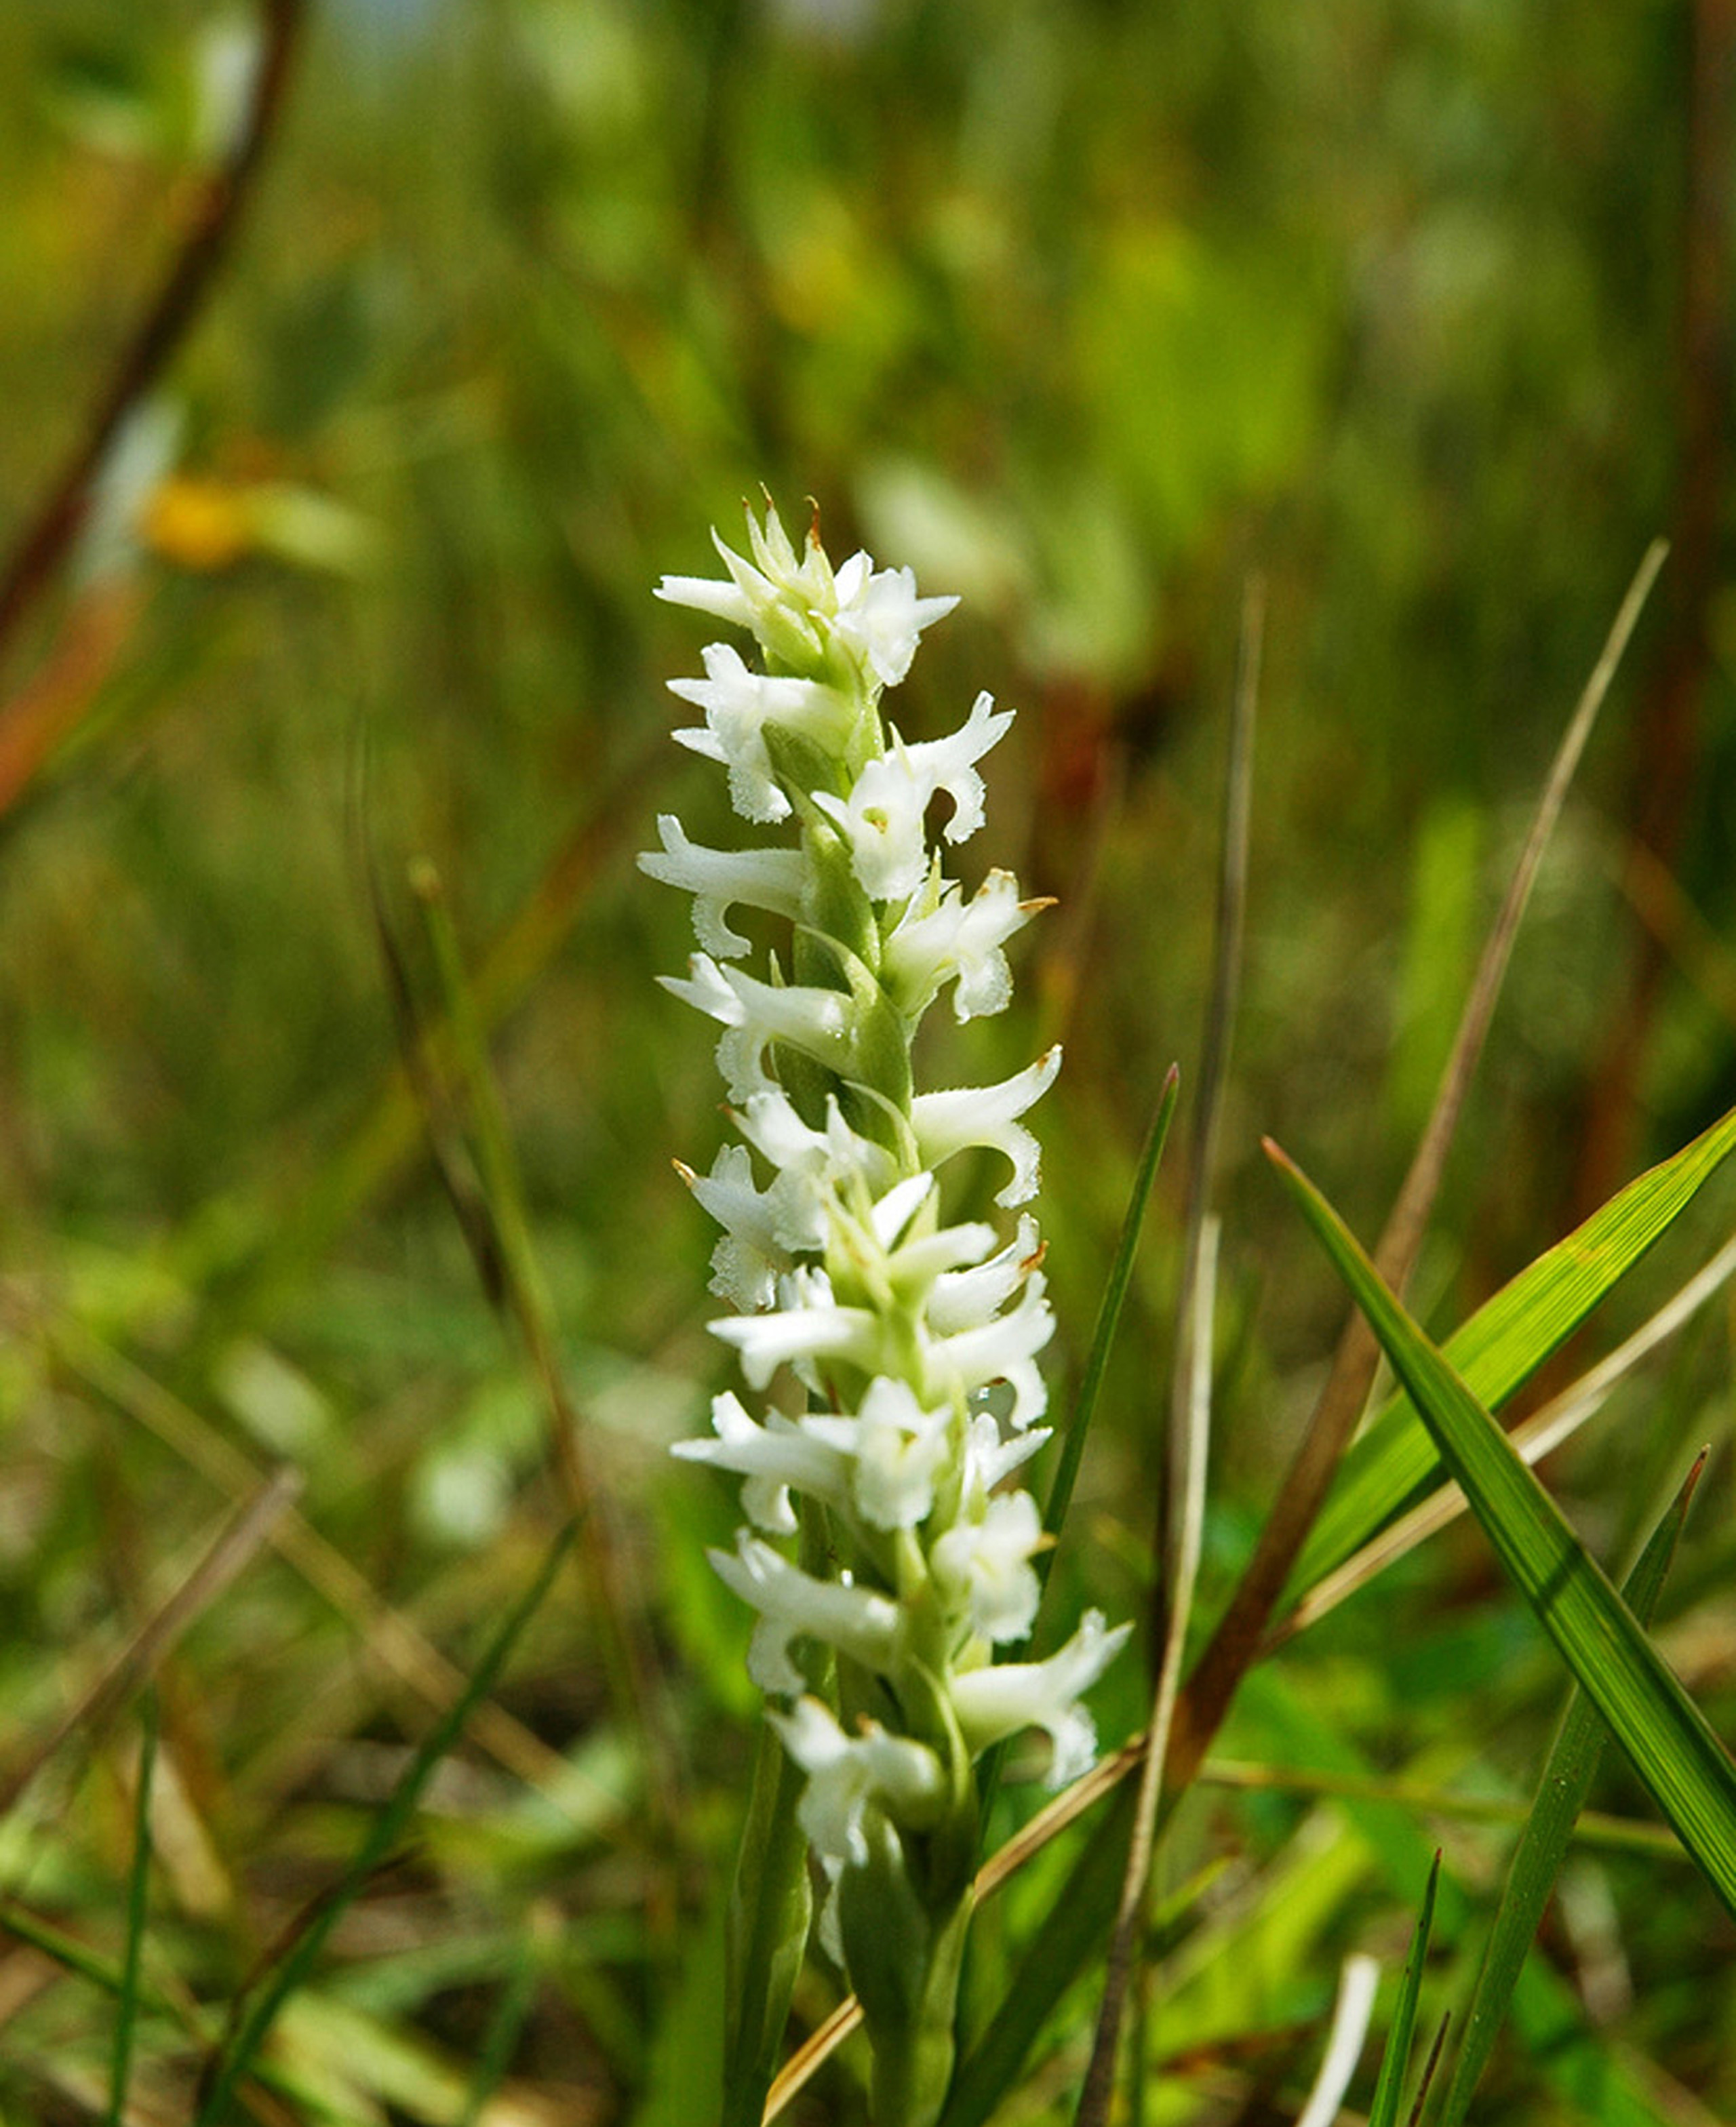 Ute ladies'-tresses plant with white flowers in a grassy environment